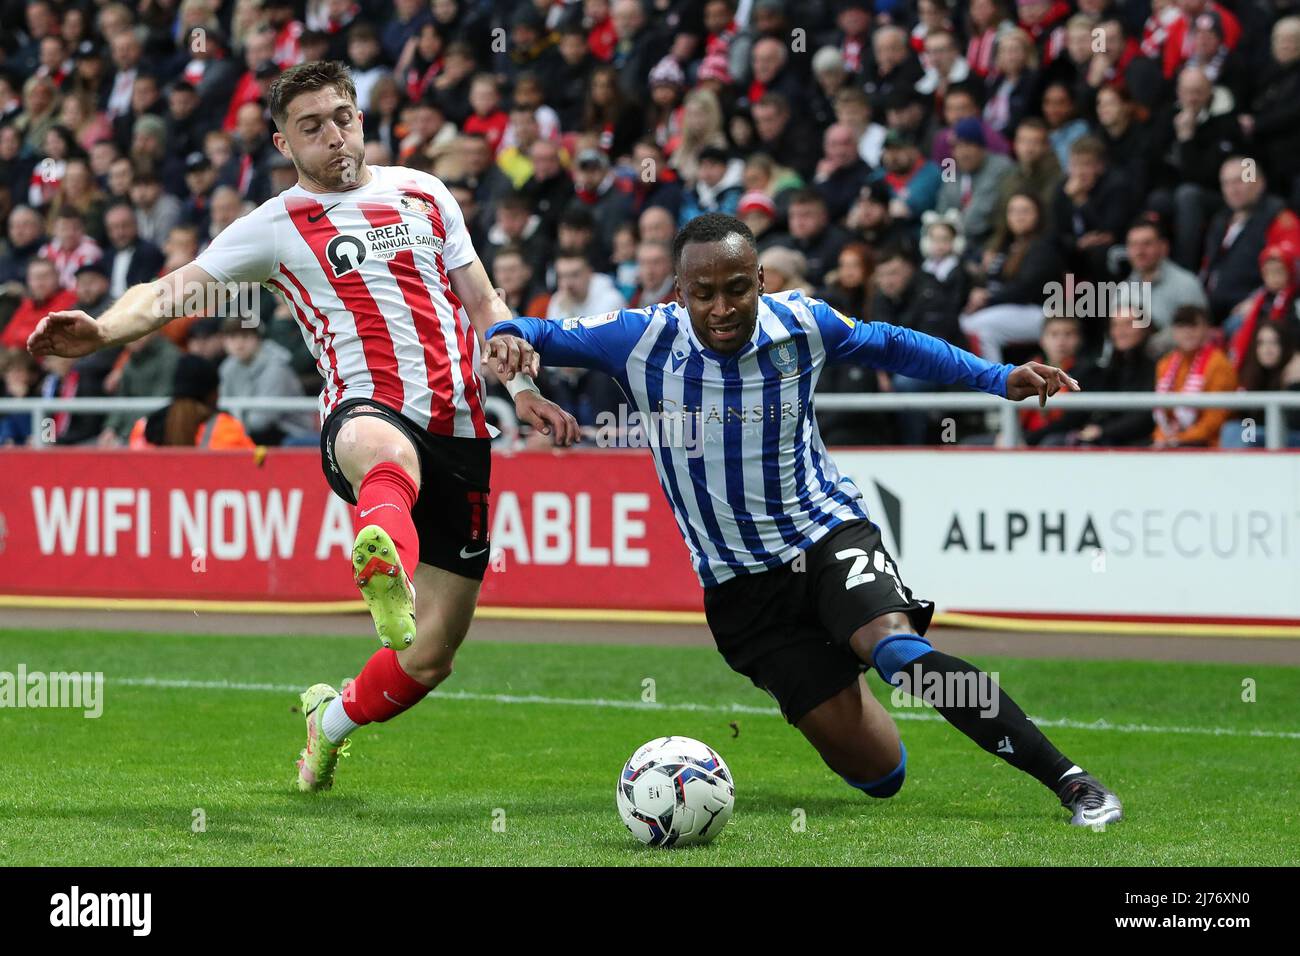 Saido Berahino #24 of Sheffield Wednesday is challenged by Lynden Gooch #11 of Sunderland  in Sunderland, United Kingdom on 5/6/2022. (Photo by James Heaton/News Images/Sipa USA) Stock Photo